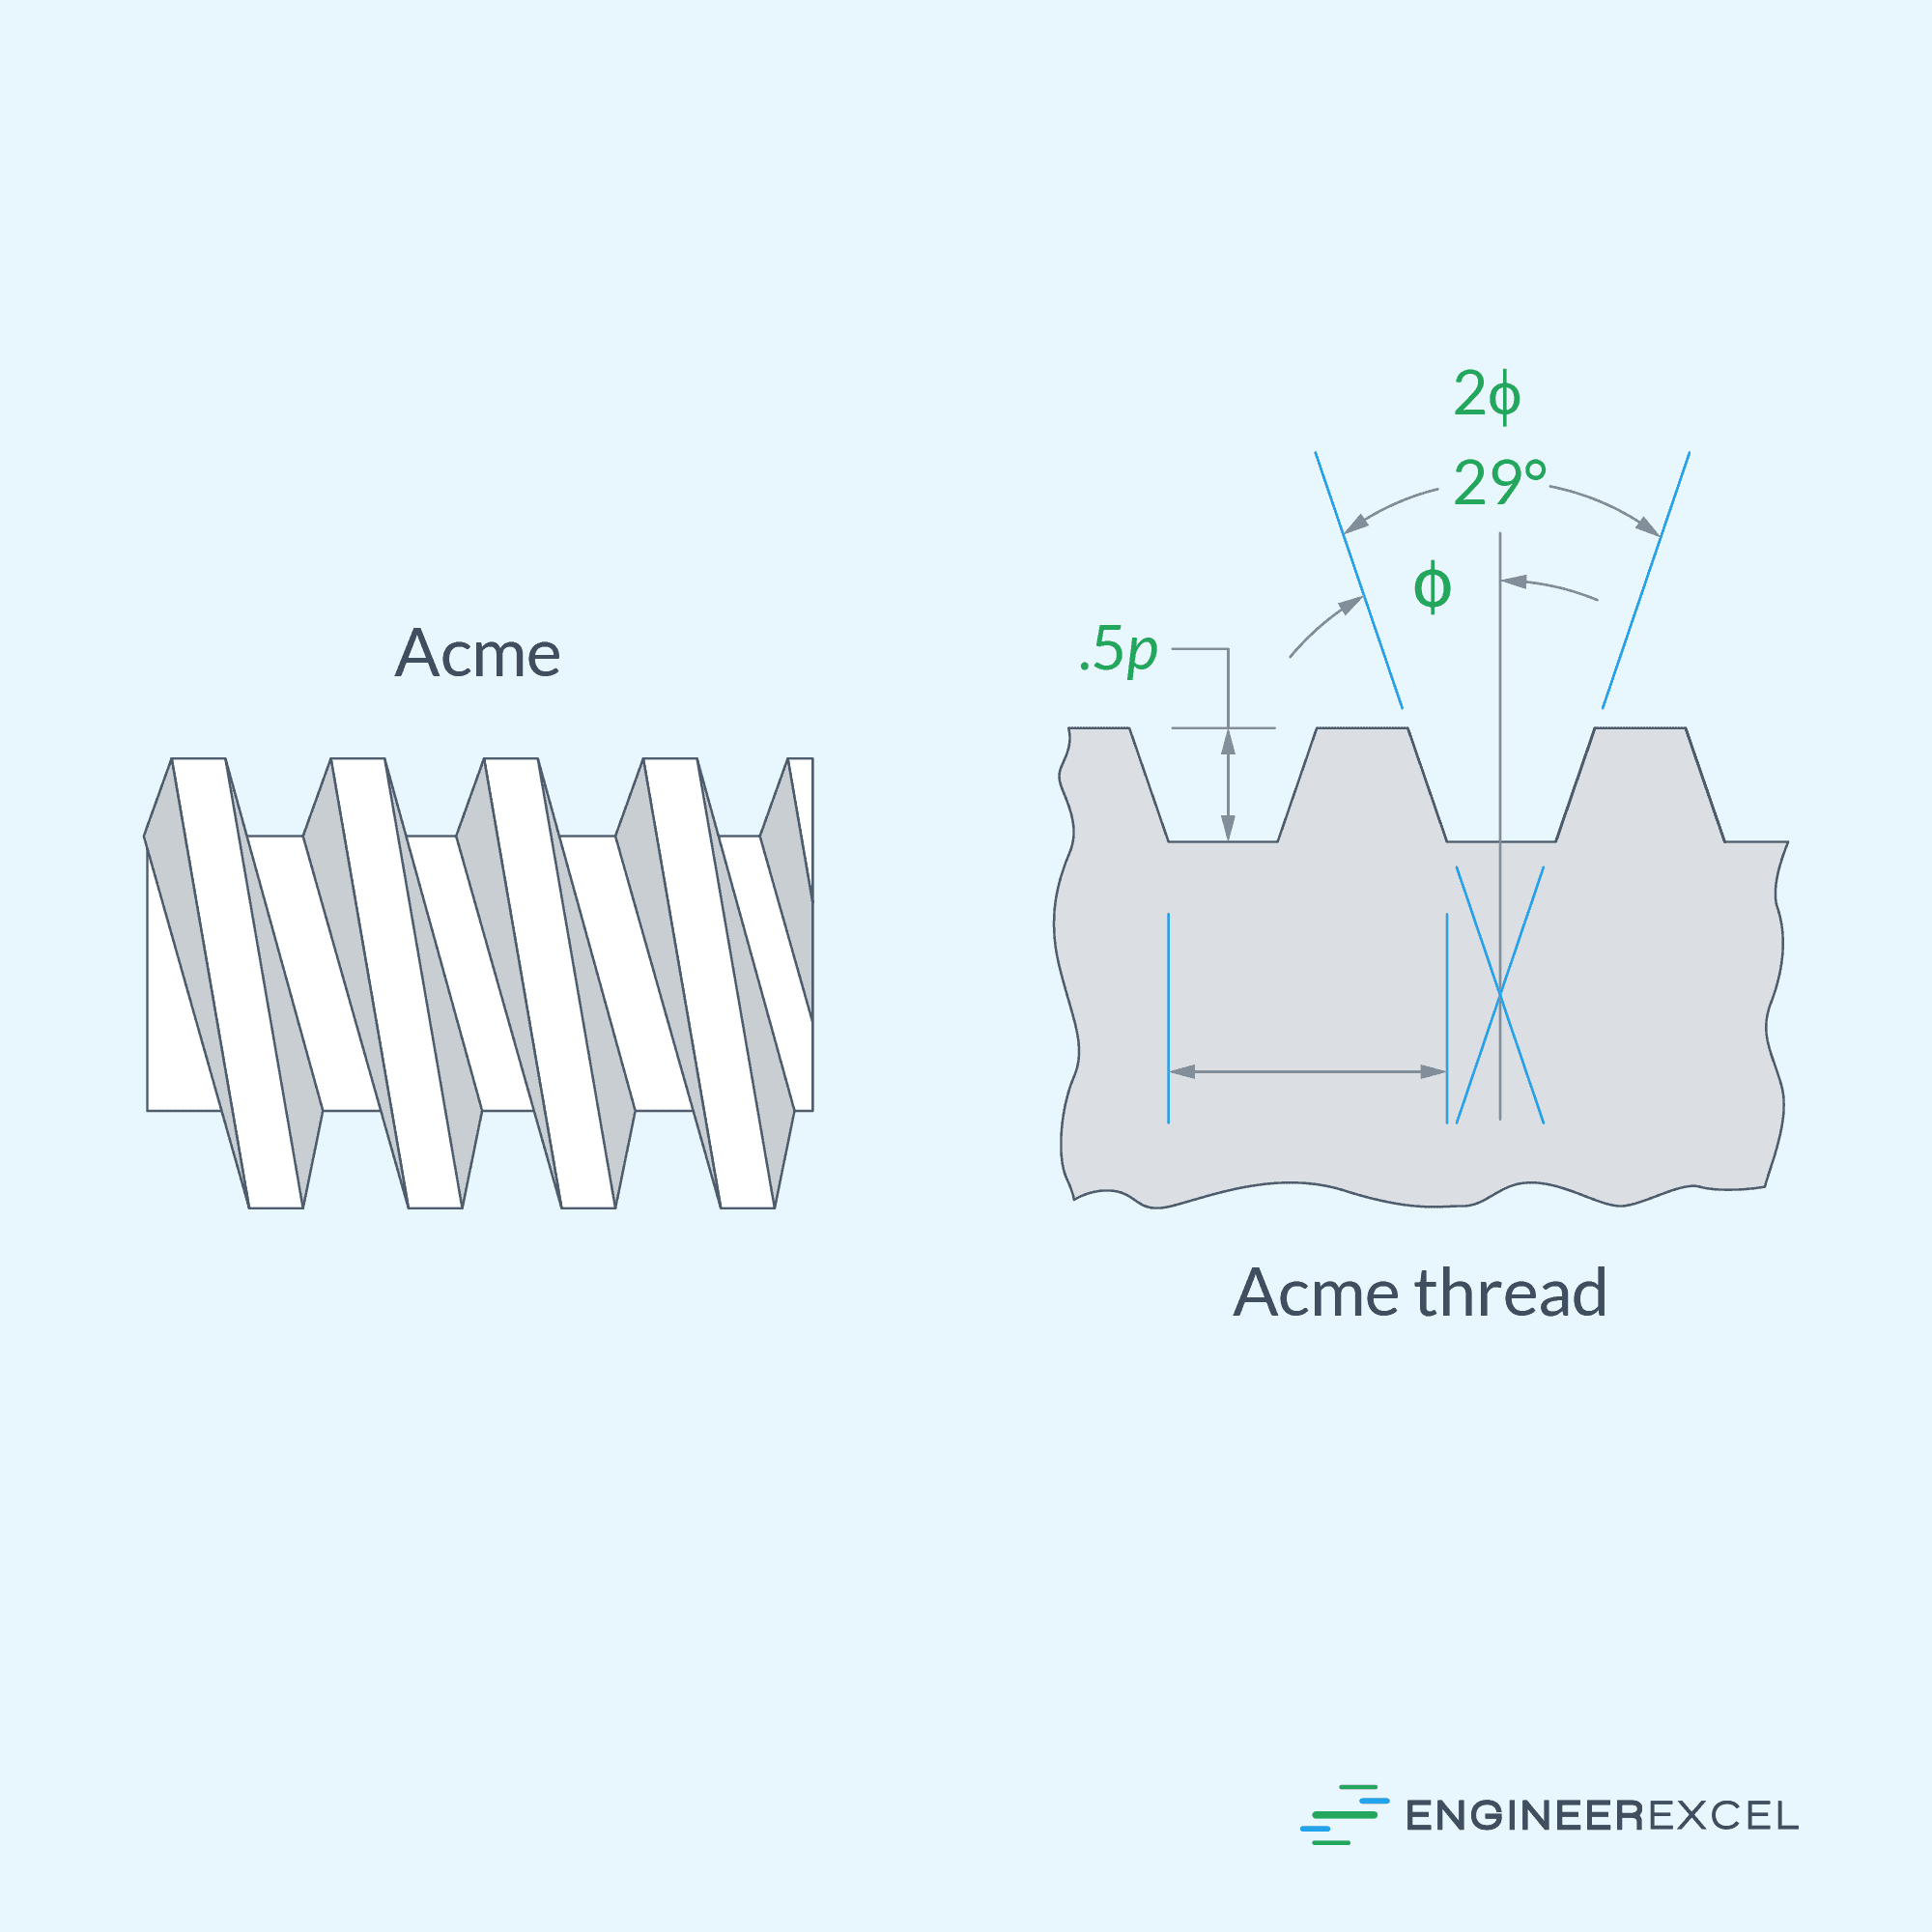 General profile of an Acme thread